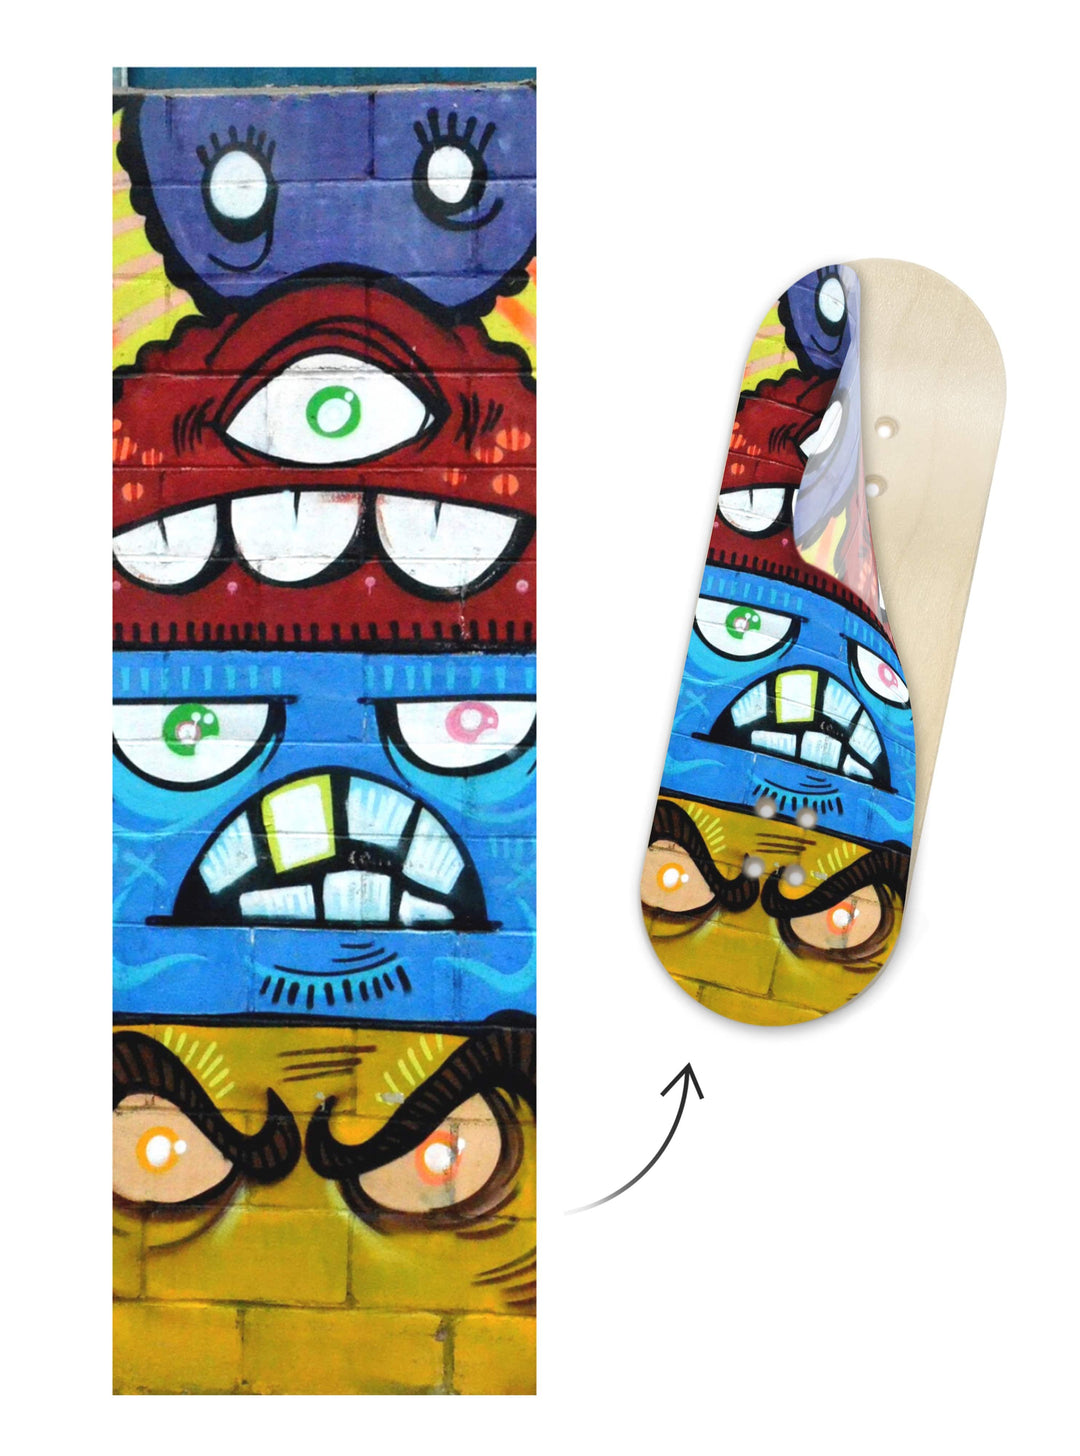 Teak Tuning "Stack 'Em Monsters" Deck Graphic Wrap - 35mm x 110mm